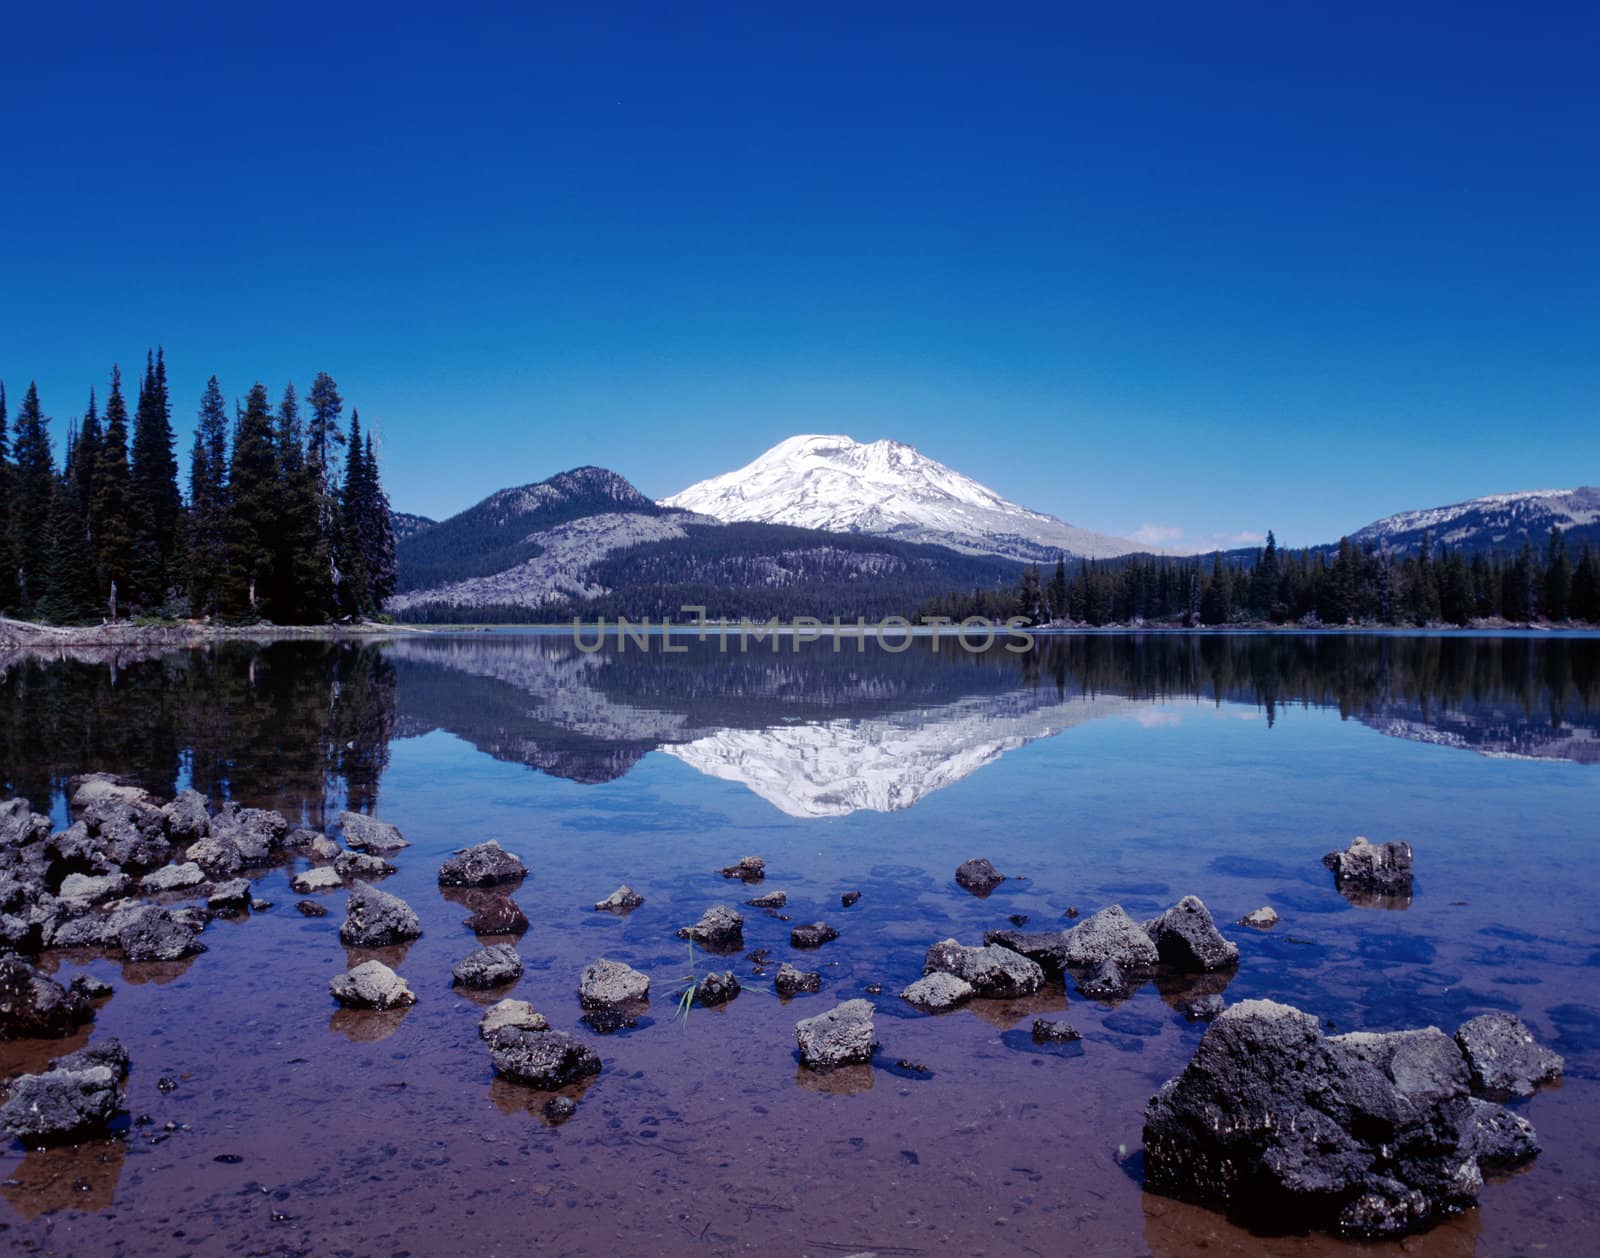 Mountain in Cascades range in Oregon reflected in a lake with clear blue sky and pine trees on either side